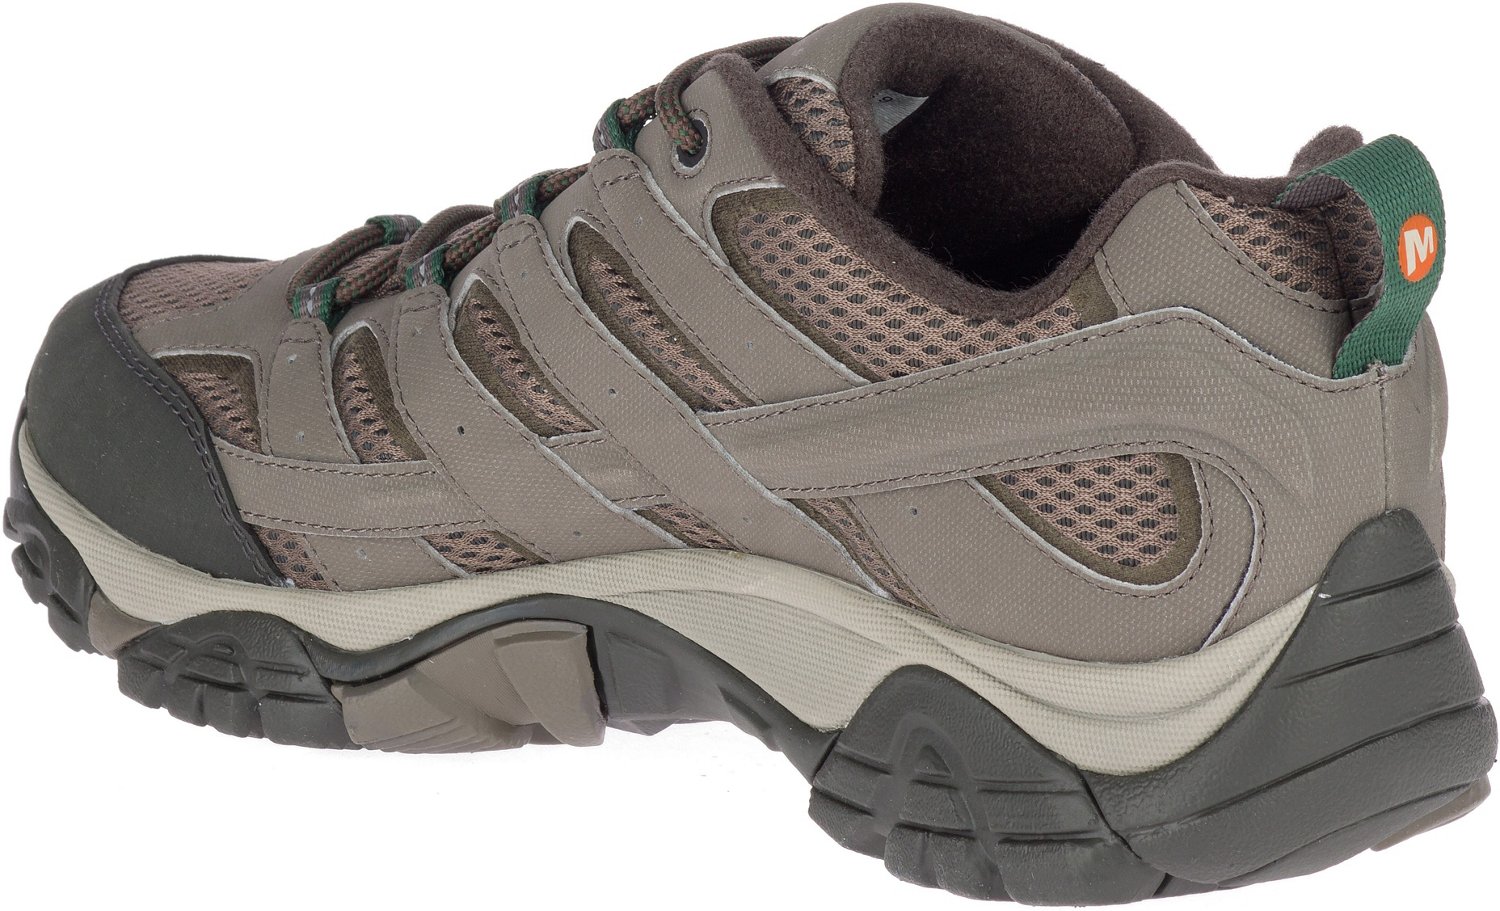 Merrell Men's Moab 2 Gore-Tex Hiking Shoes | Academy